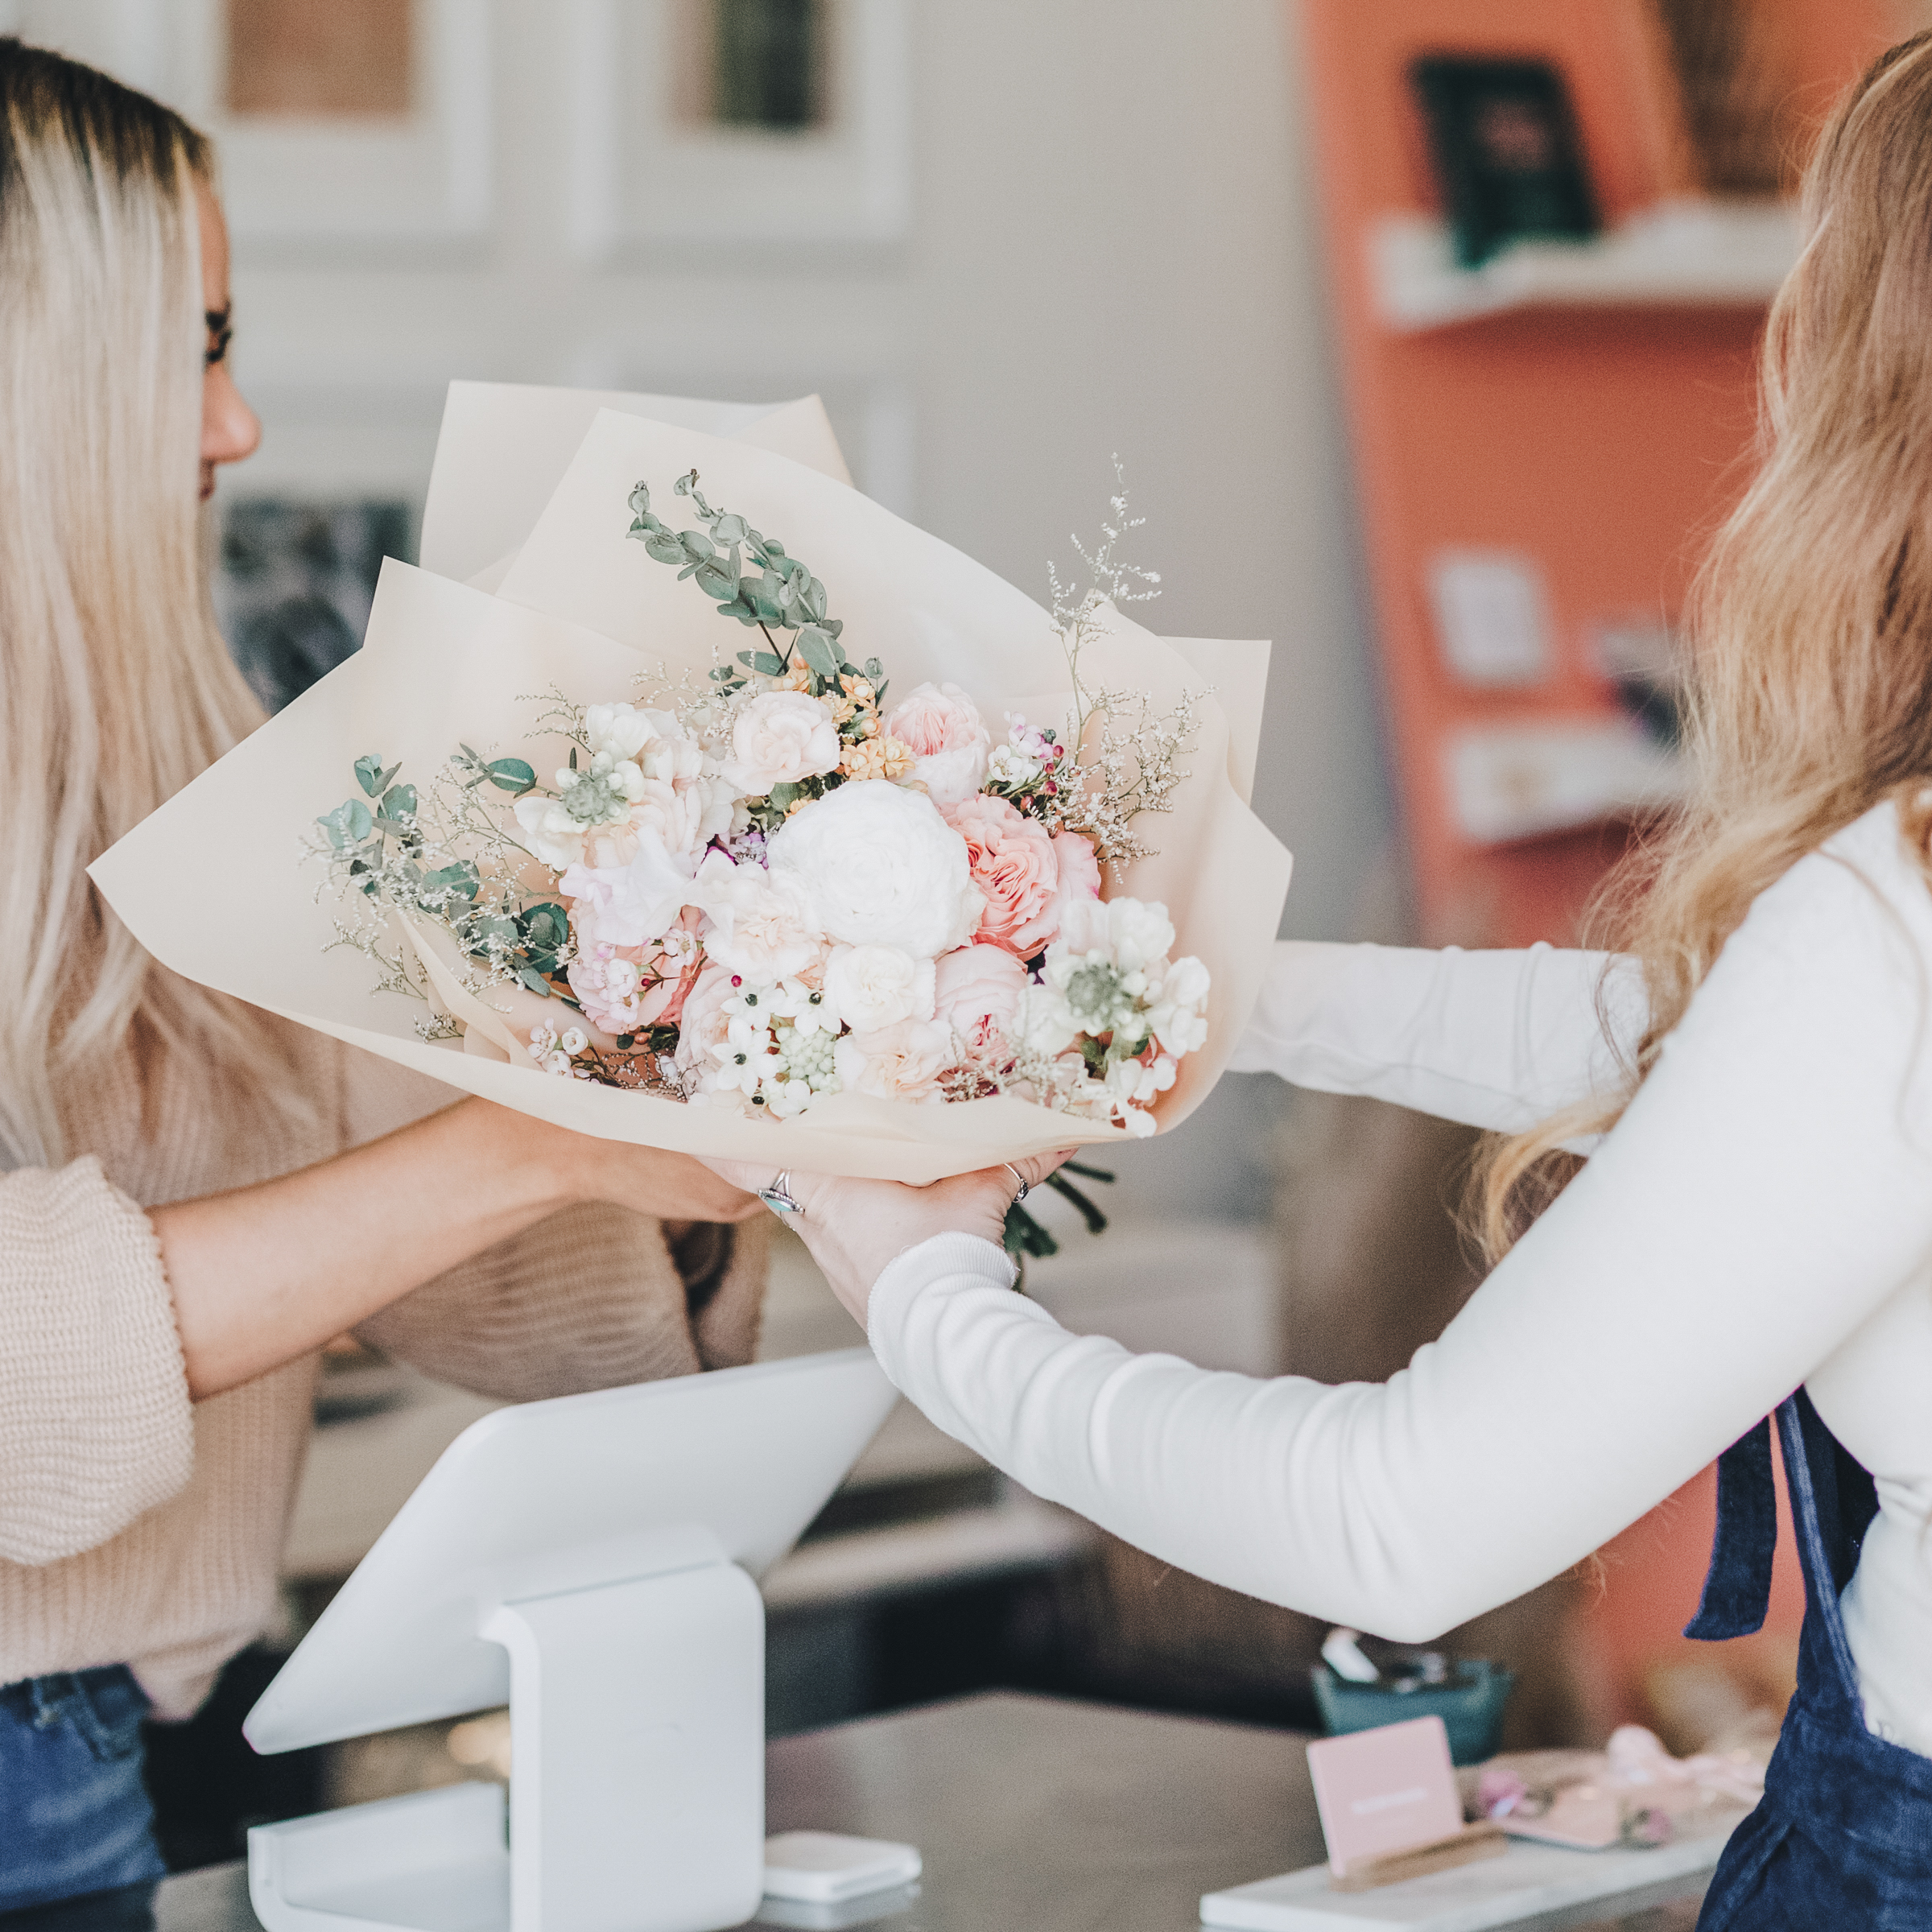 women in white handing a bouquet of flowers to another woman in a store | create financial independent | positively jane